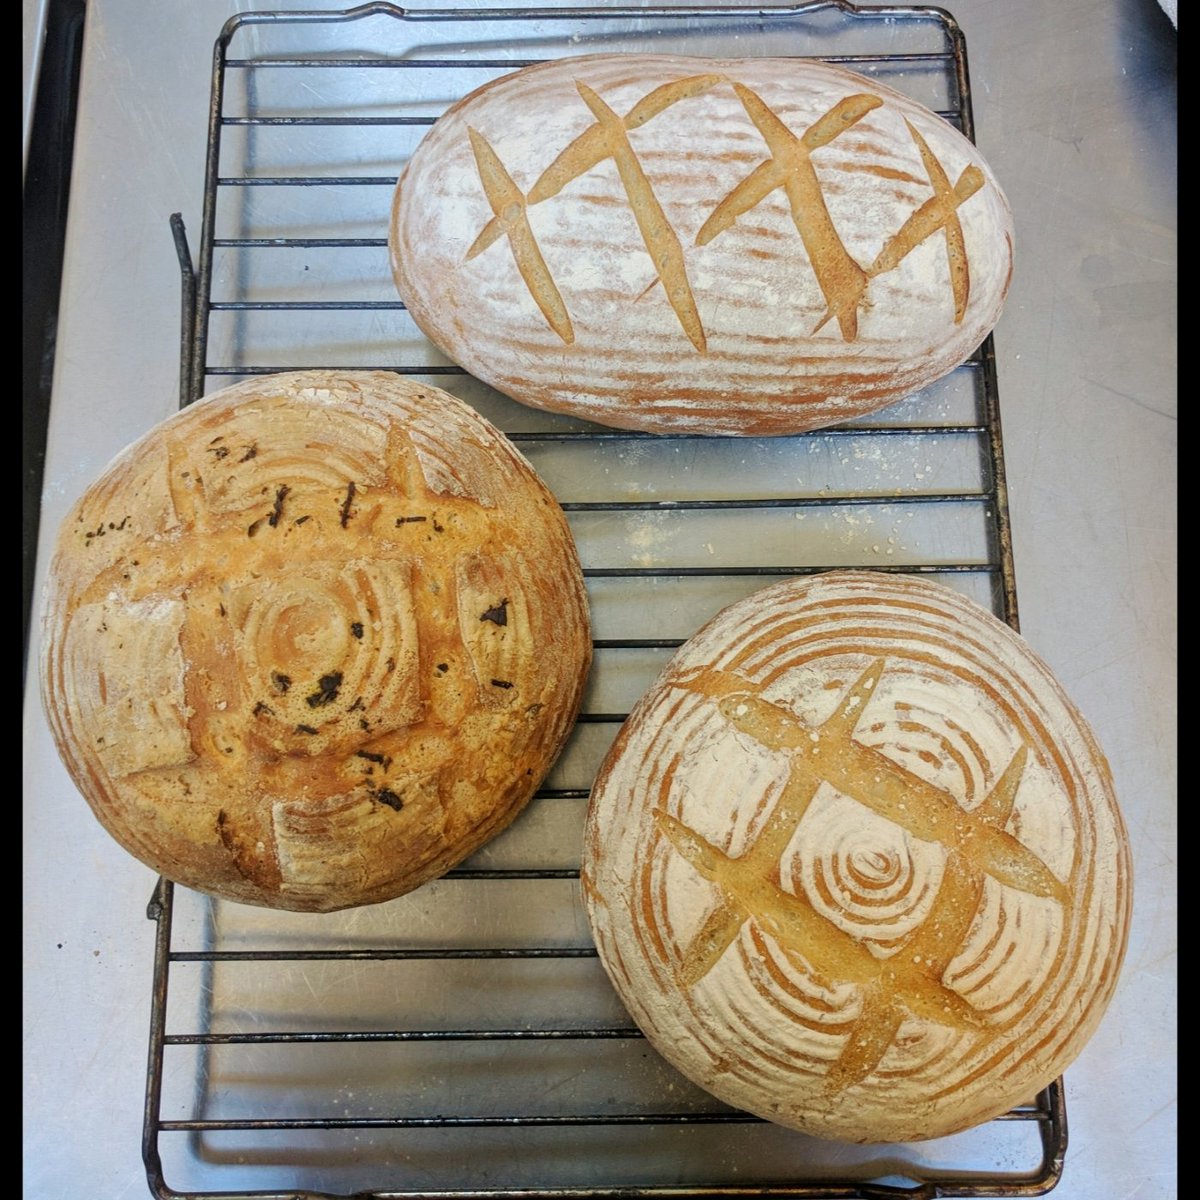 Some of the beautiful breads made by my students today in my artisan bread making course. So proud of everyone that came.. every single loaf was absolutely excellent! #boreplace #organic #organicbread #adultlearning #cheftraining #kent